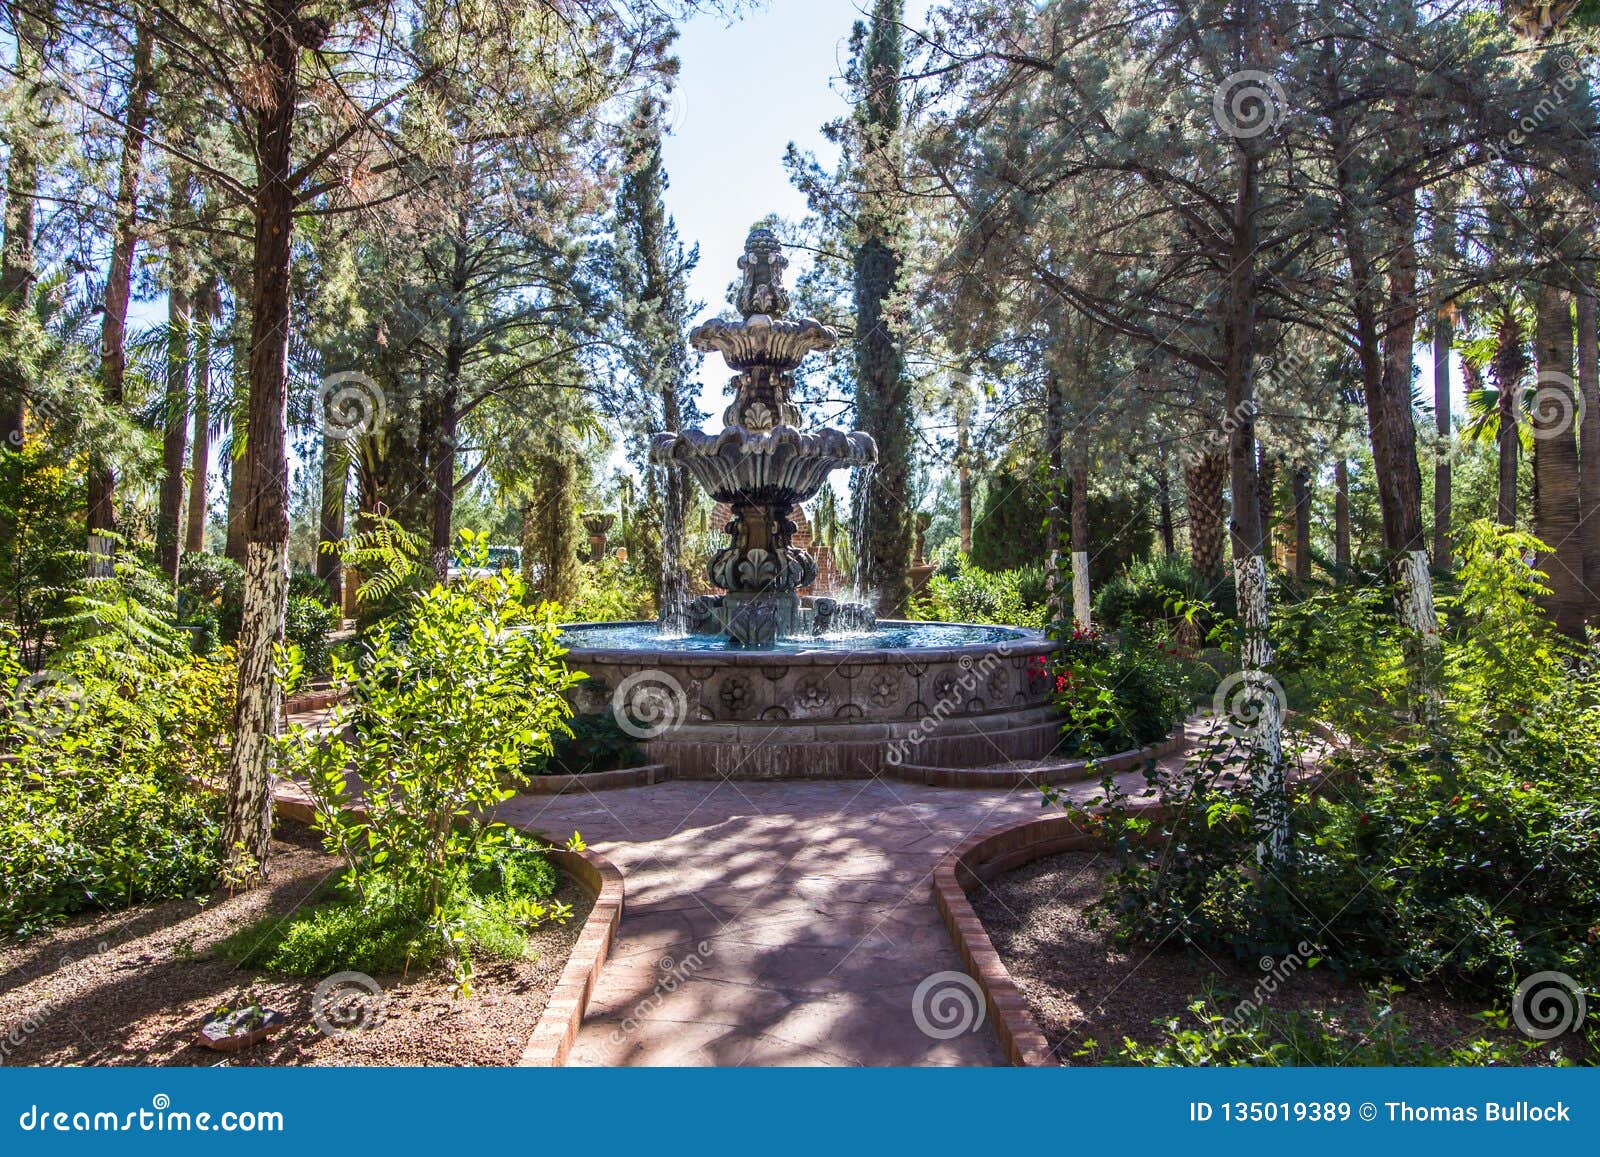 Path Leading To Fountain in Monastery Garden Stock Image - Image of